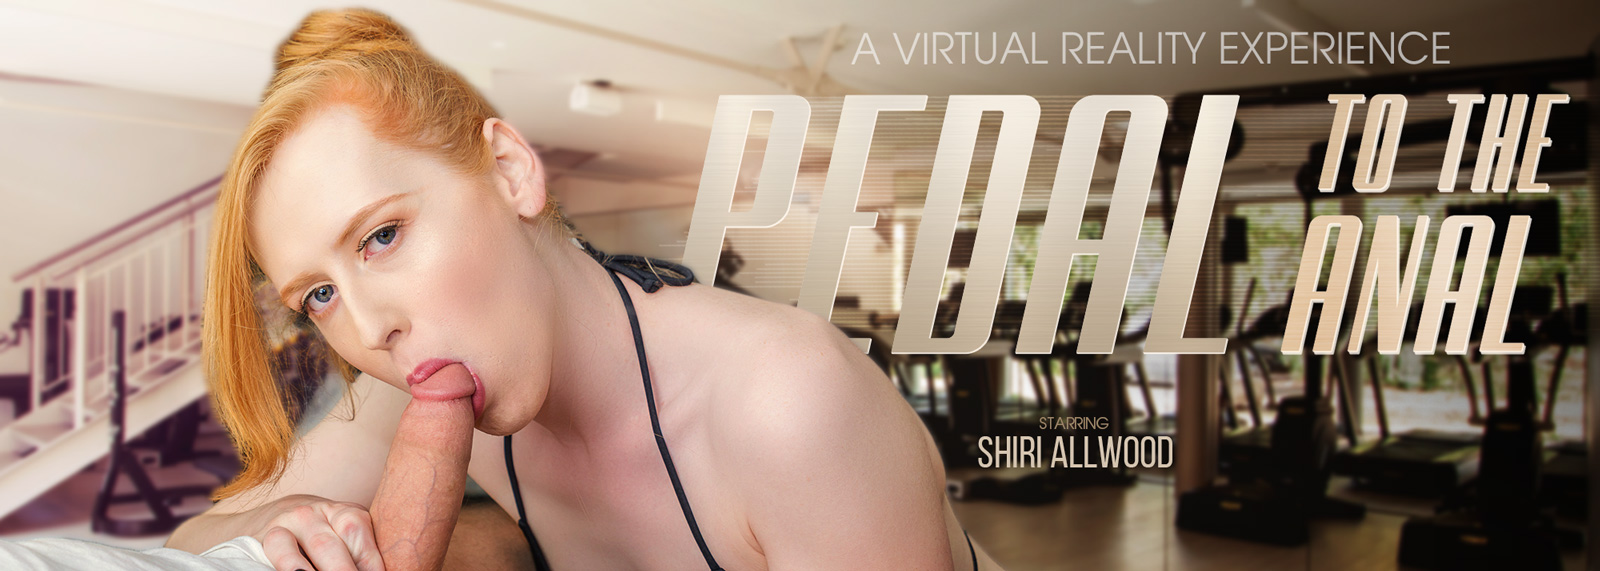 Pedal to the Anal - Trans VR Porn Video, Starring: Shiri Allwood